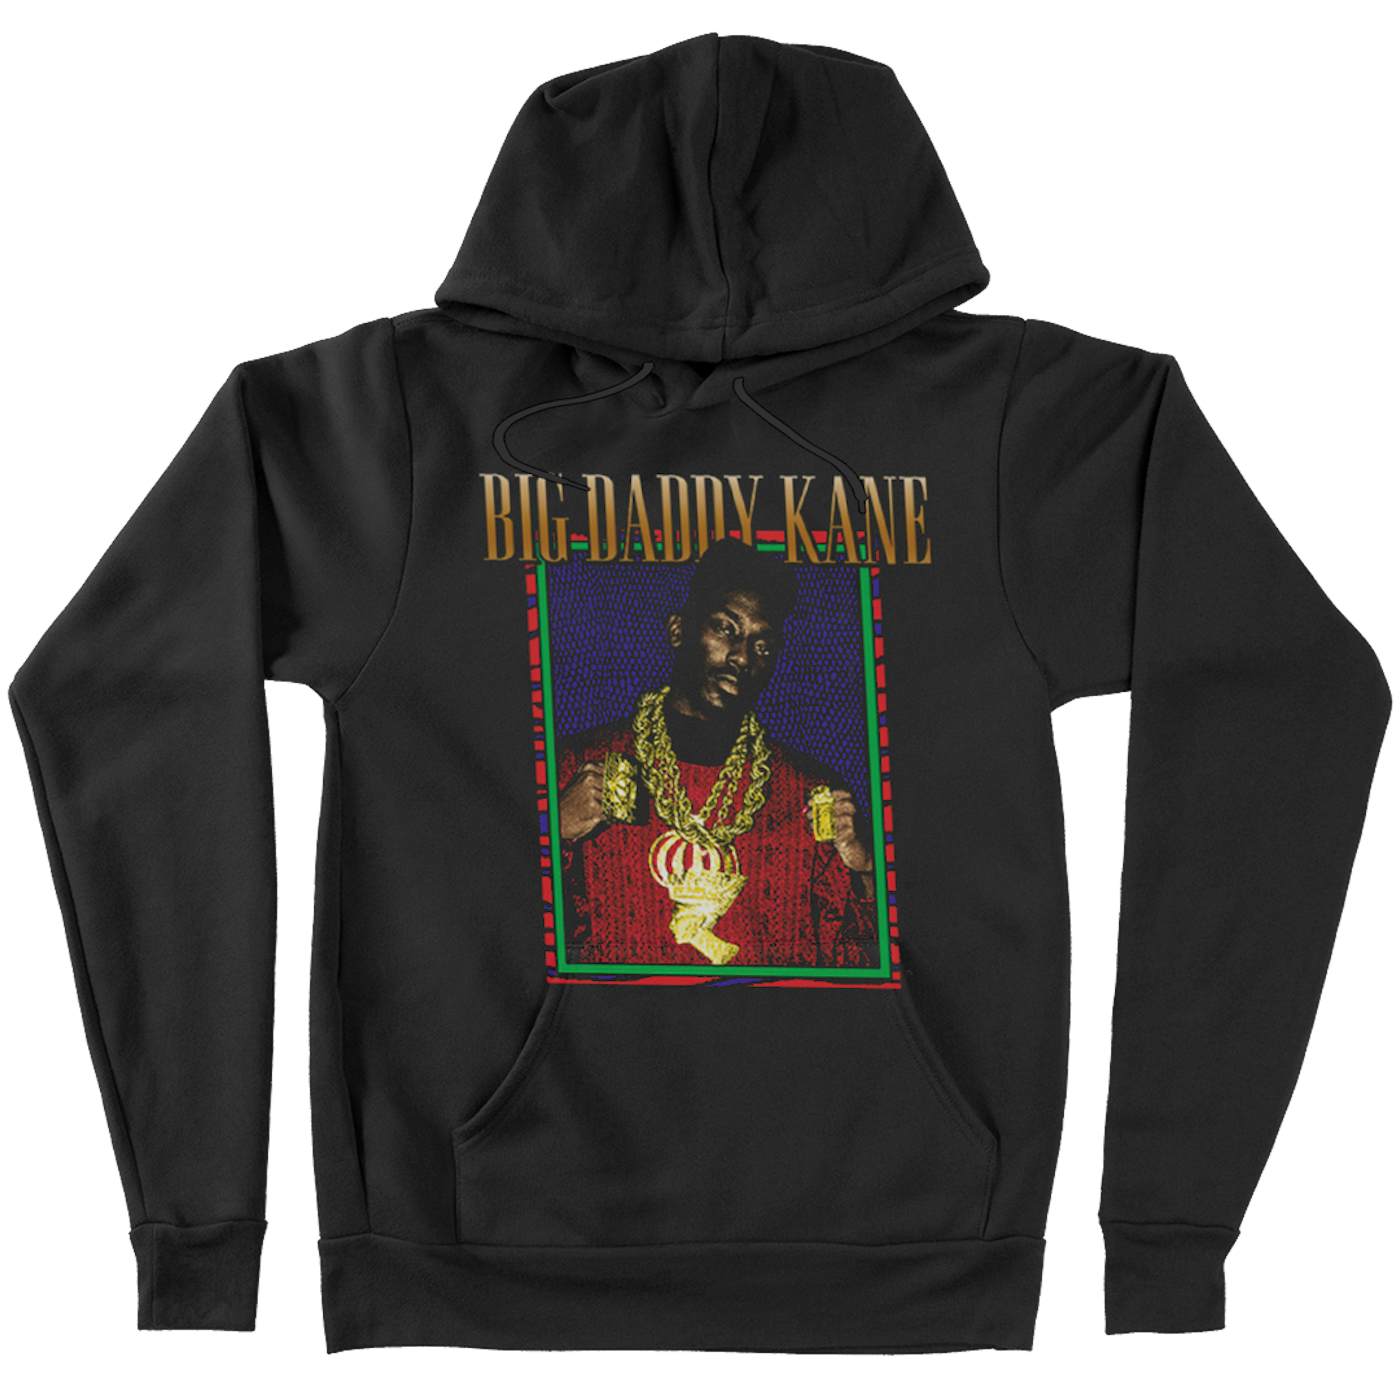 Big Daddy Kane "Chains" Pullover Hoodie